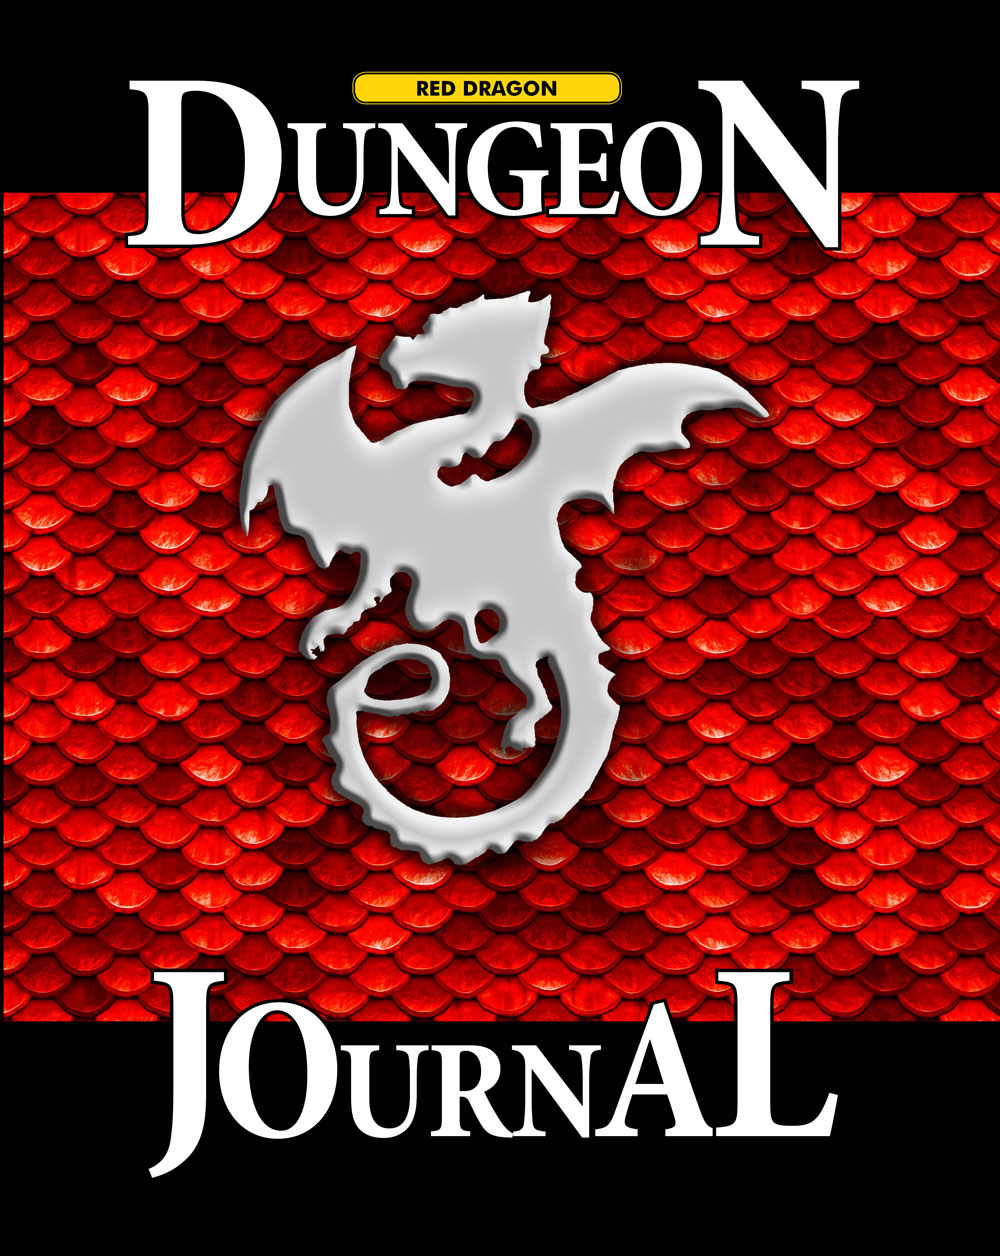 Red Dragon Dungeon Journal